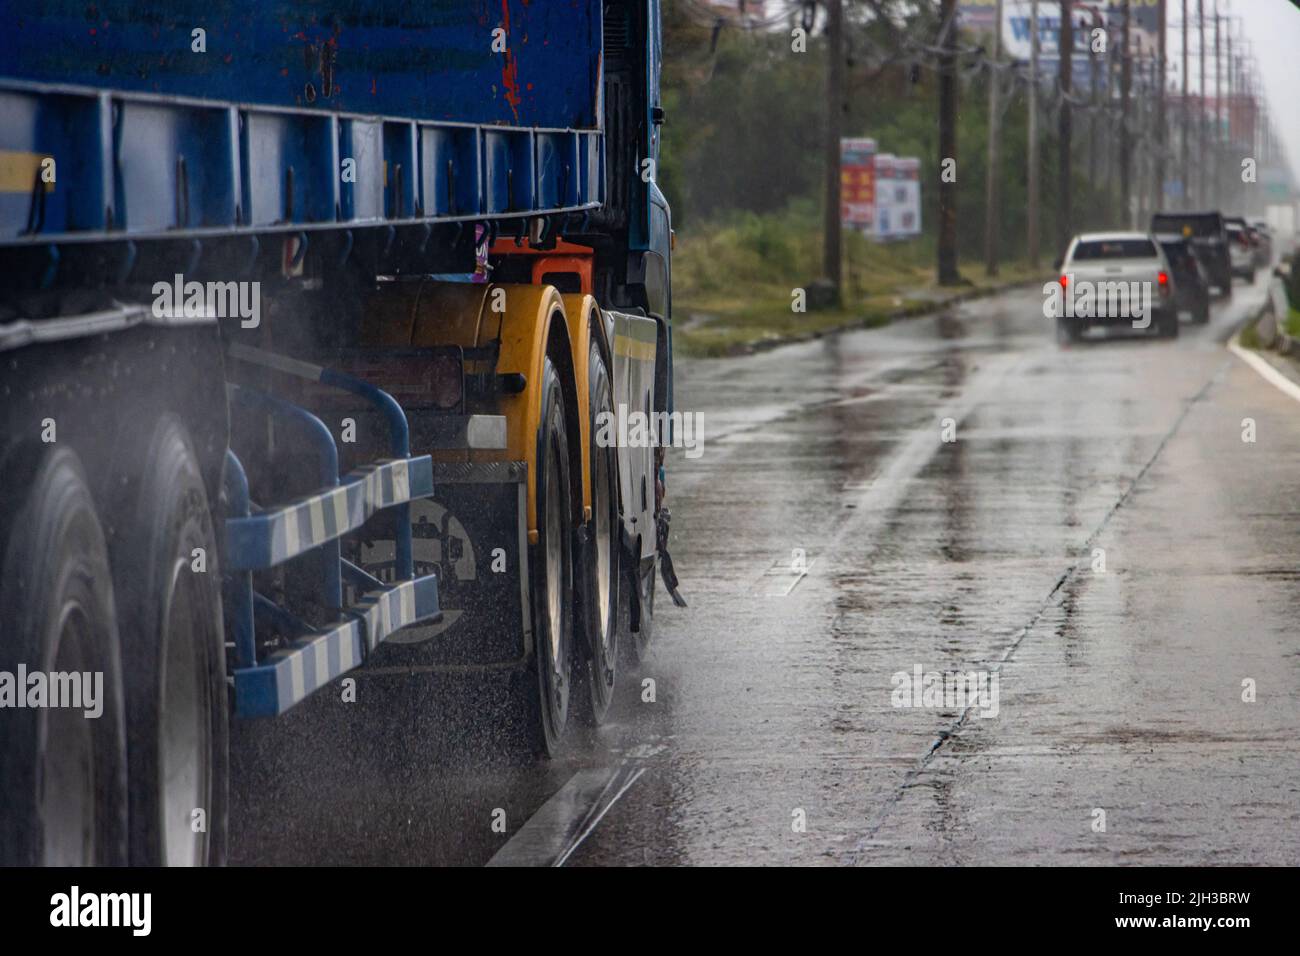 The truck drives on a wet road behind a convoy of cars Stock Photo